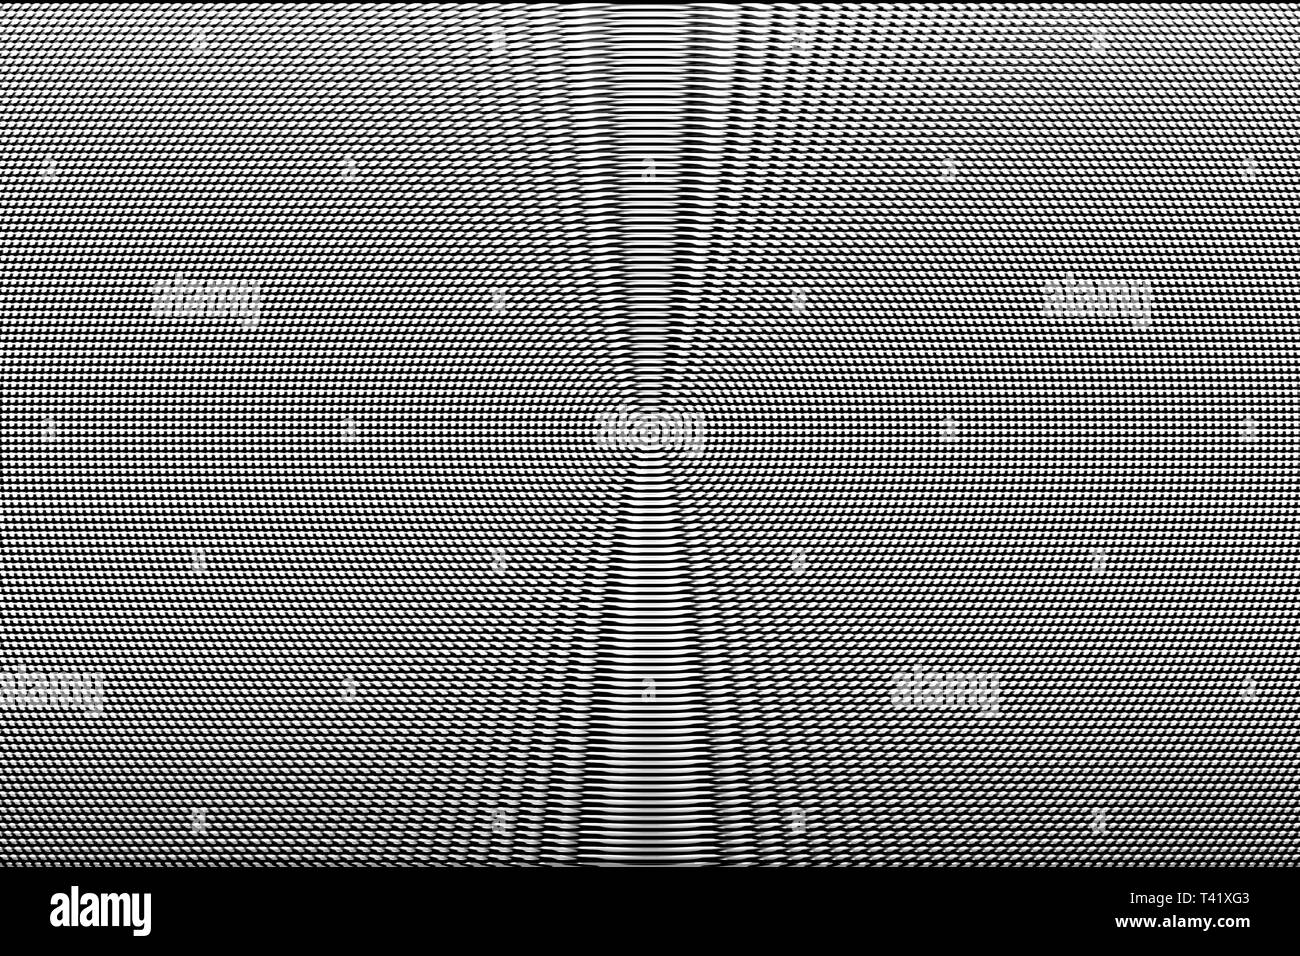 White and black hypnotic optical illusion abstract background. Monochrome glitch texture. Stock Photo